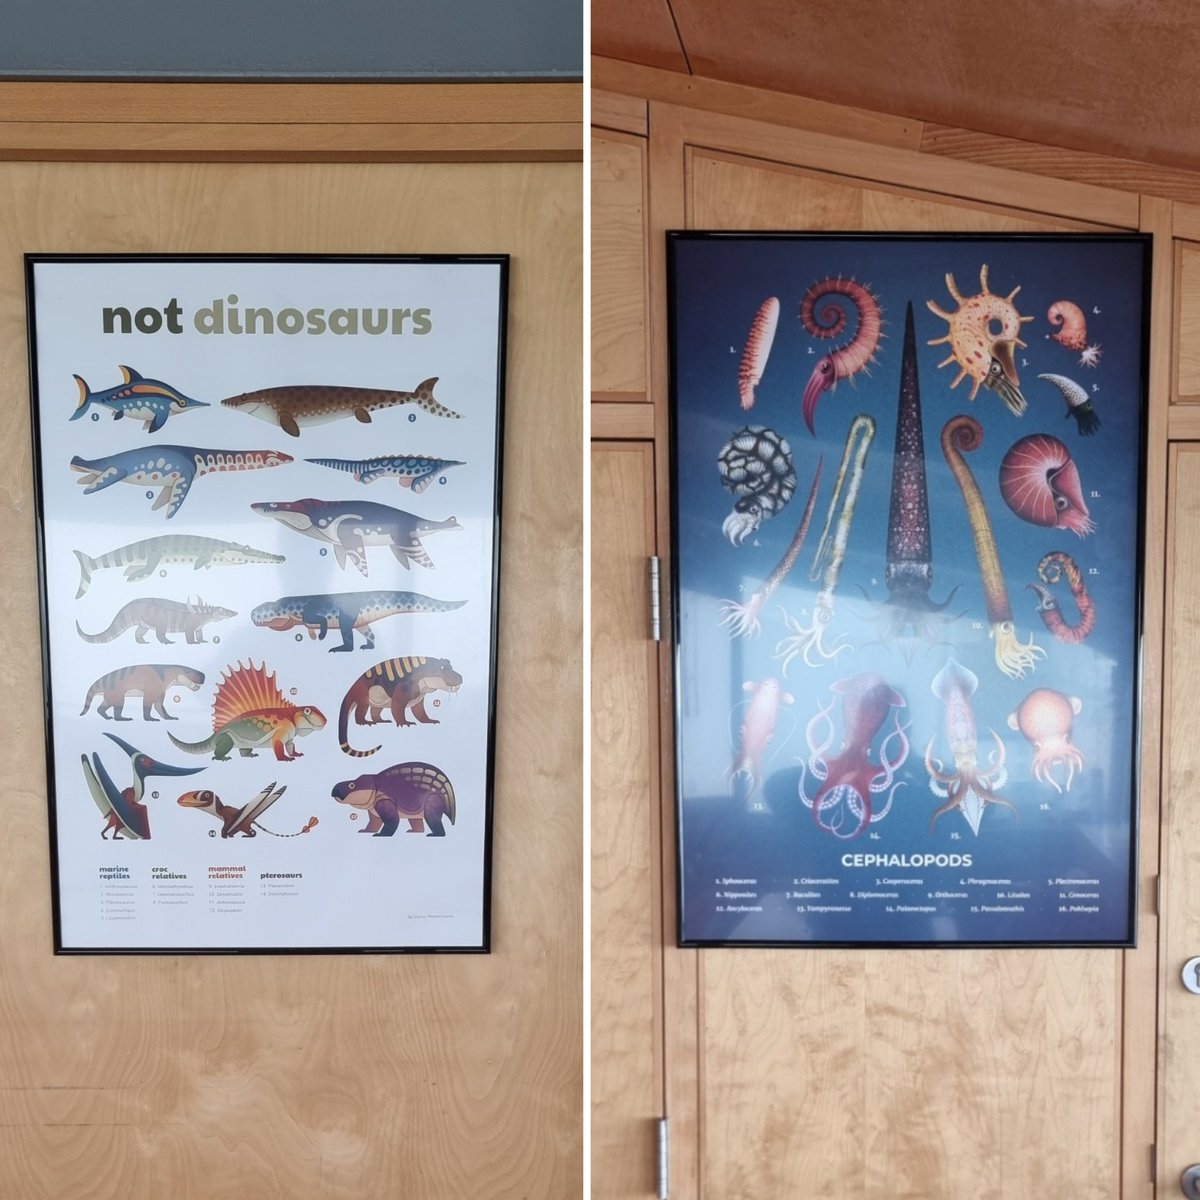 Put my handywork to the test today, my first contribution to the museum educational decor! Used a spirit level n' everything 😉 And they say I'm only good for talking about fossils 🤣 #fossils #museums #palaeontology #scicomm